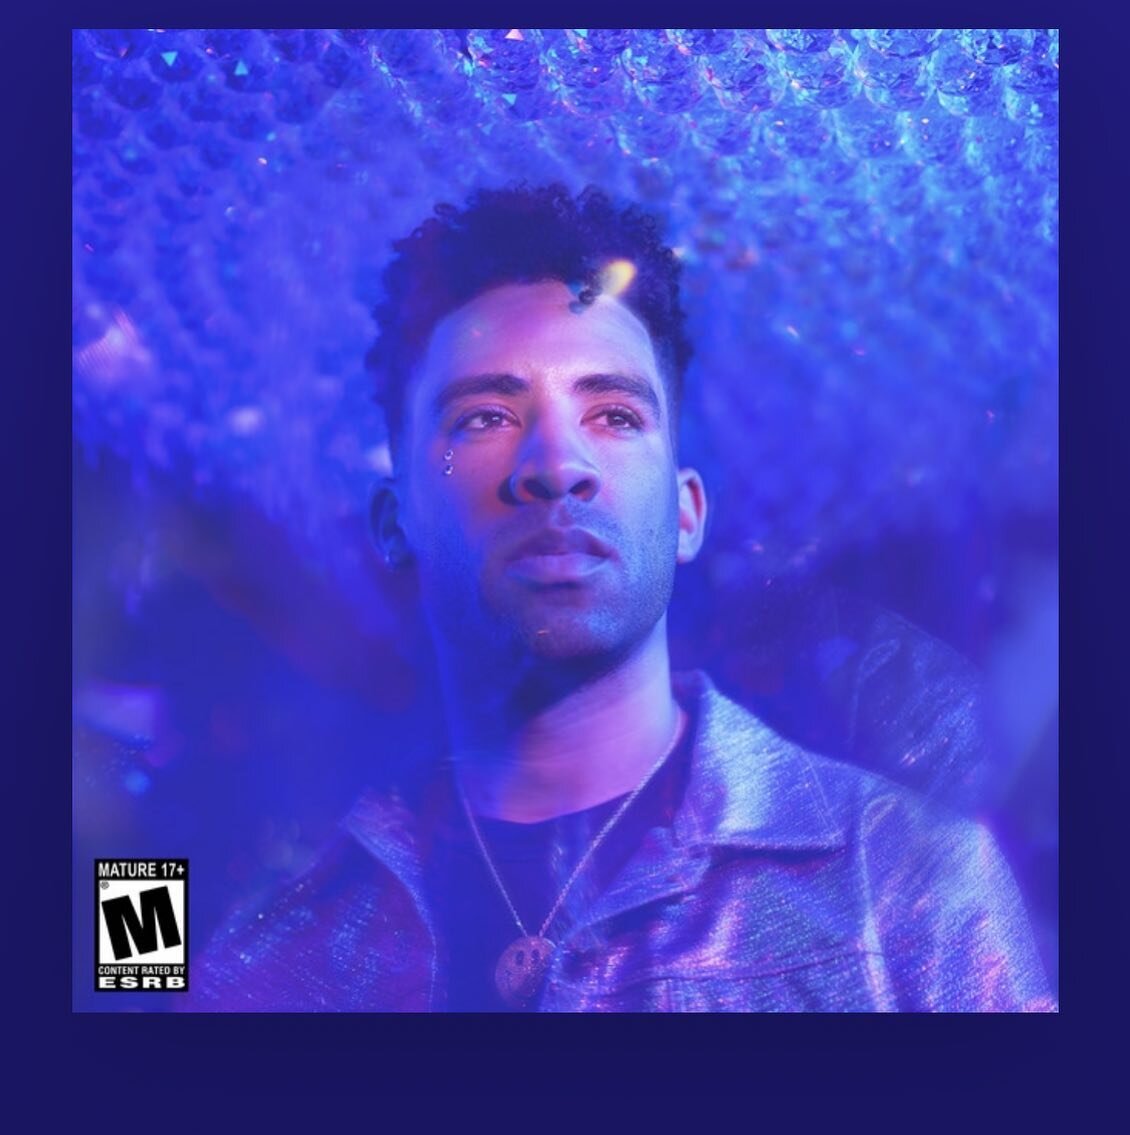 I&rsquo;m so glad I listened to @superduperkyle album Light of Mine. I didn&rsquo;t really know many tracks by him, but this album is really up my alley. Great listen.